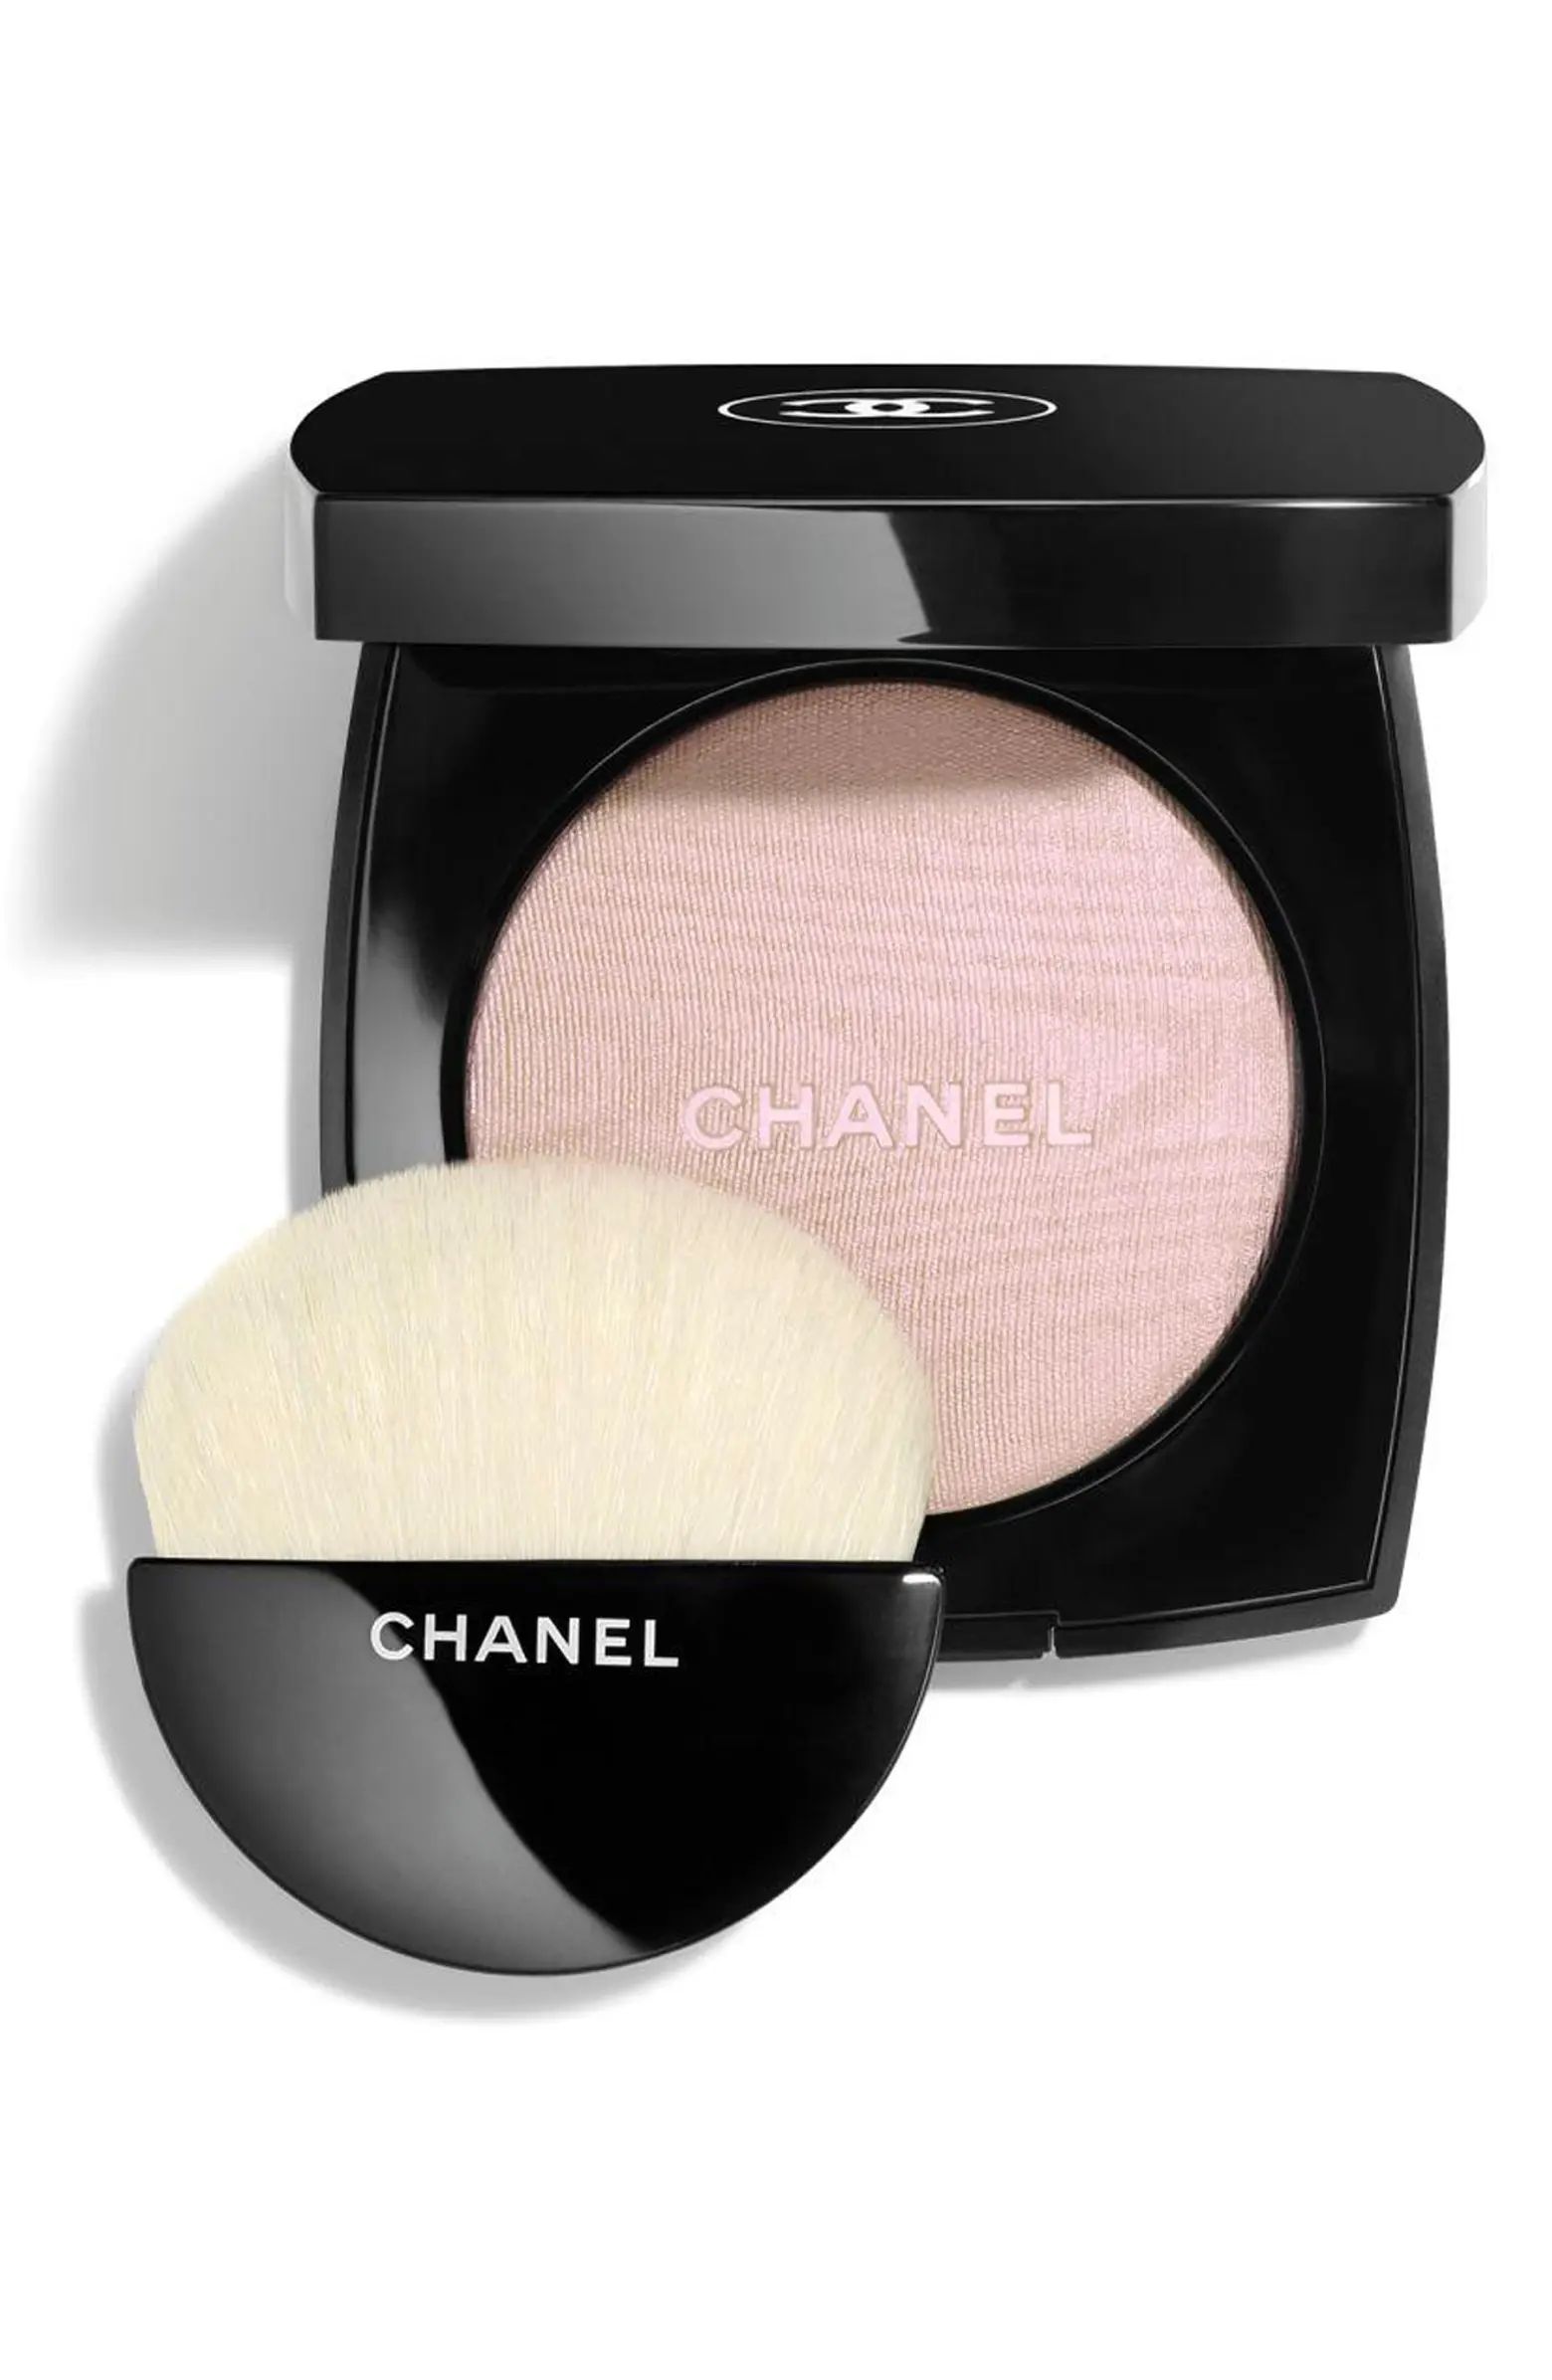 CHANEL HIGHLIGHTING Powder Compact | Nordstrom | Nordstrom